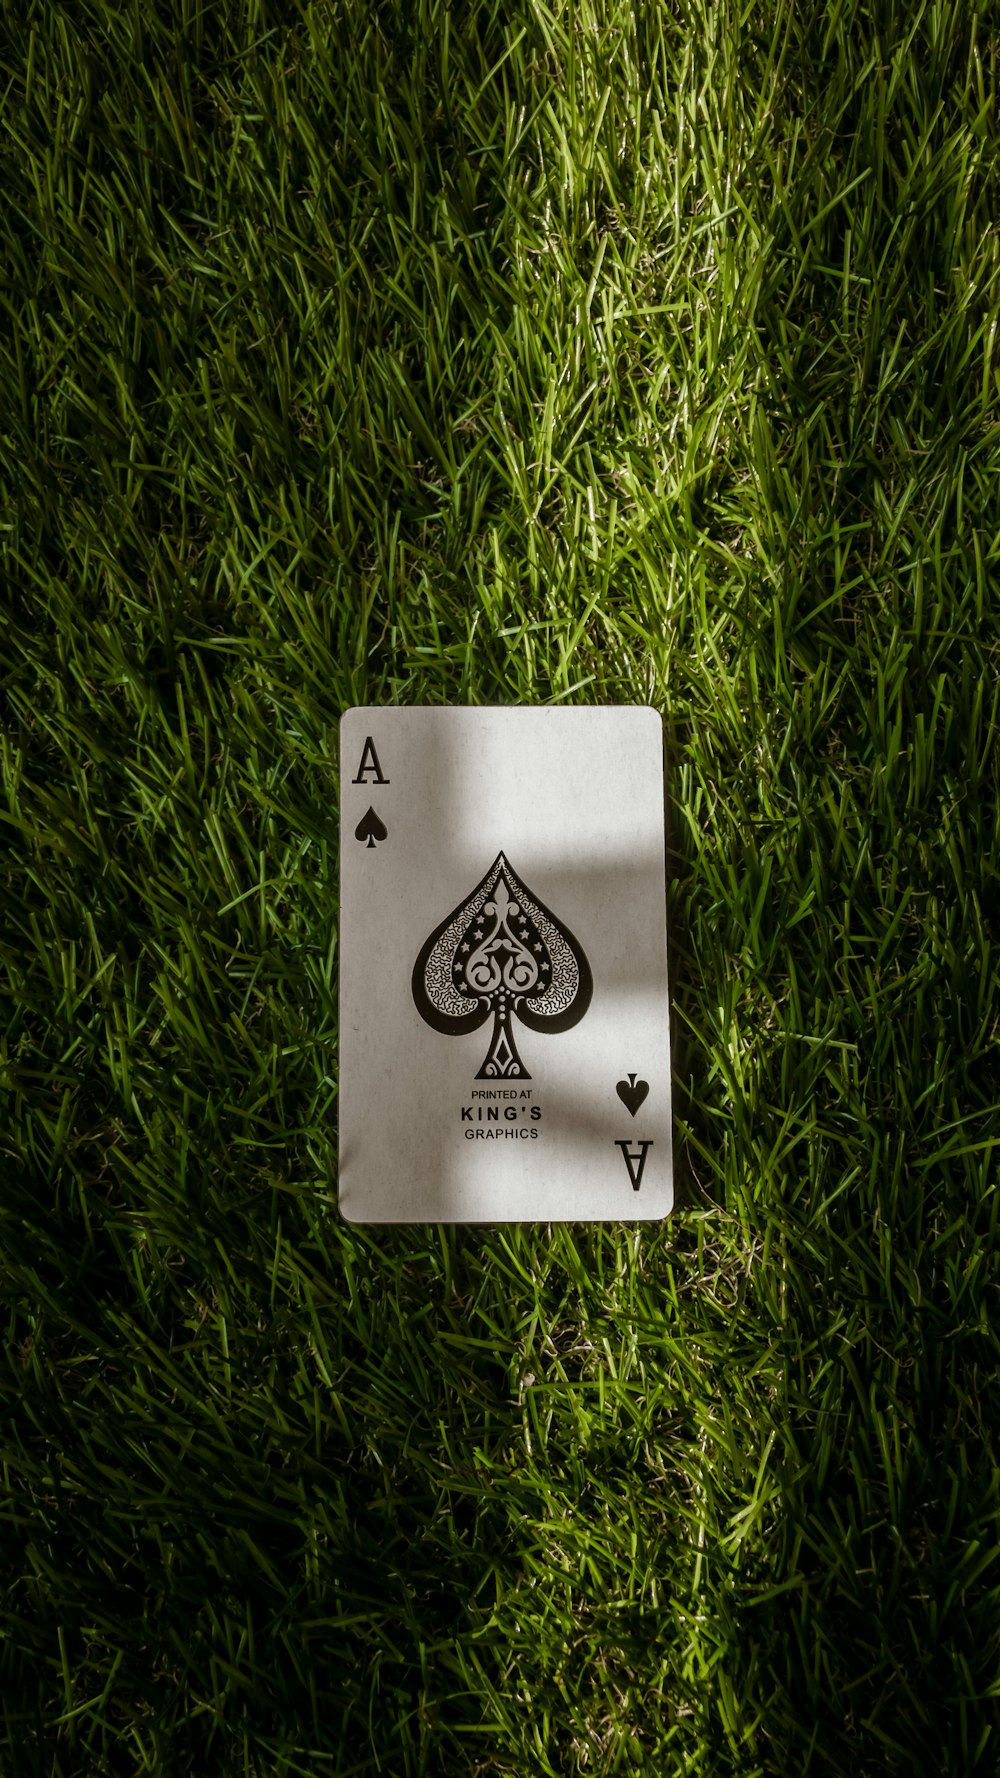 ace of spade playing card on green grass